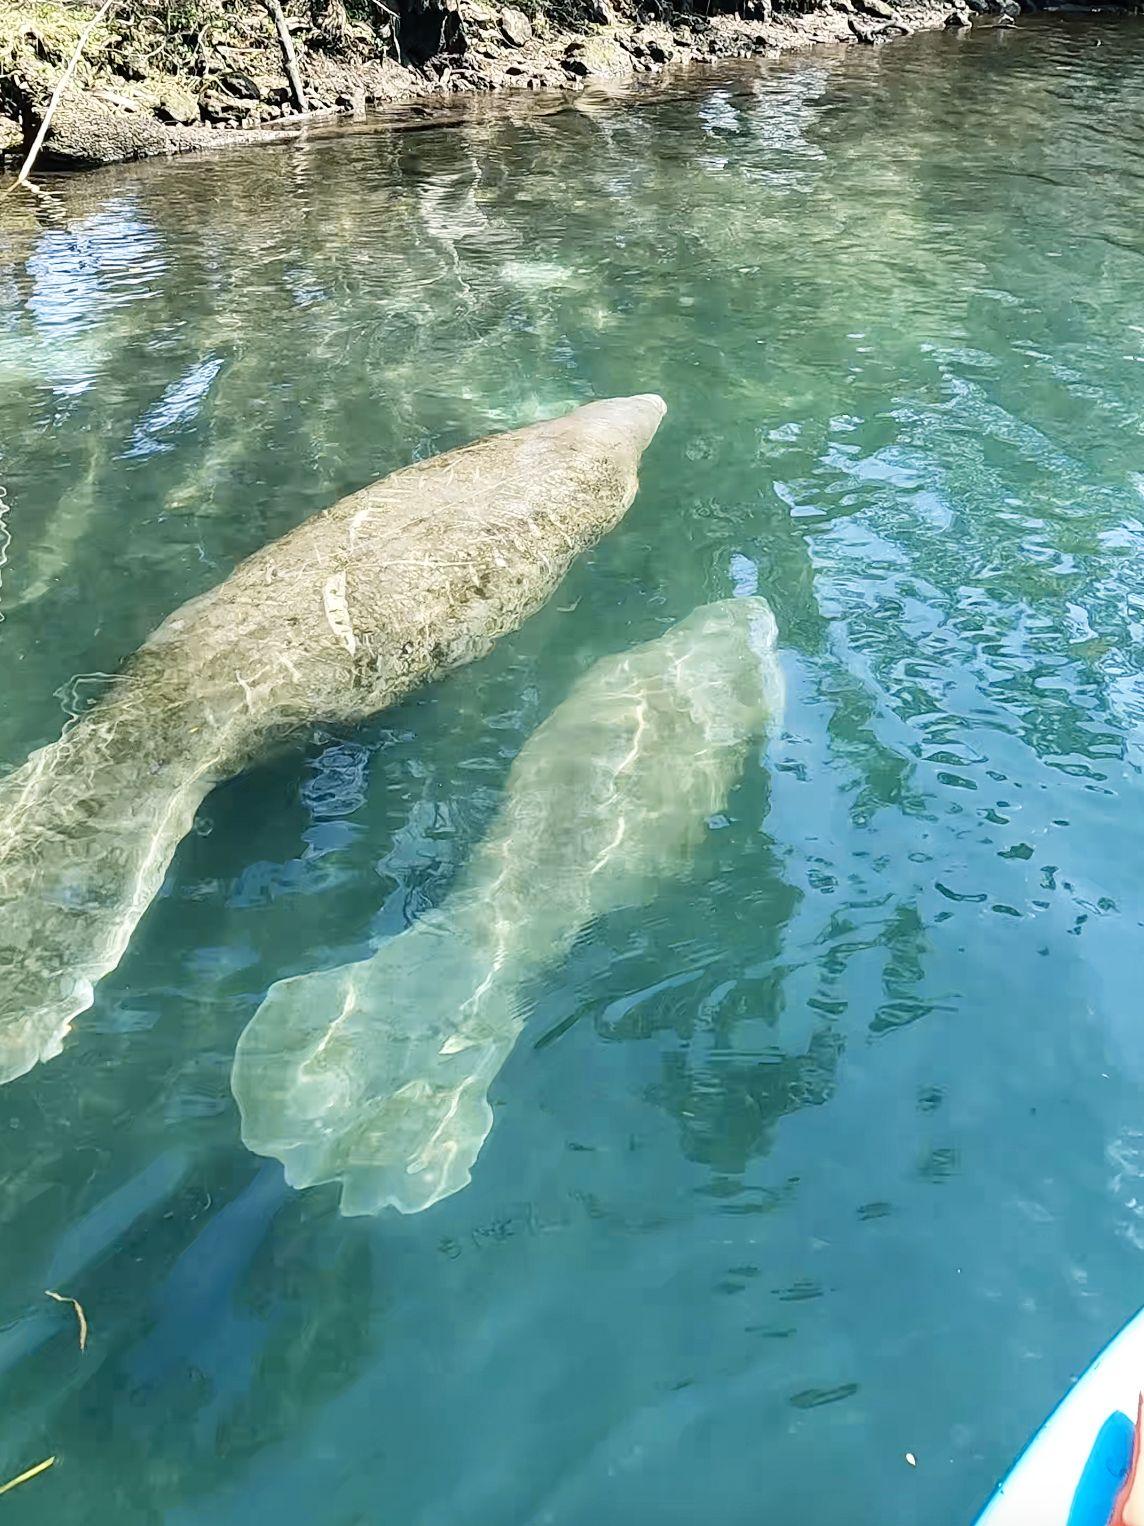 Two manatees swimming at the surface in Crystal River.